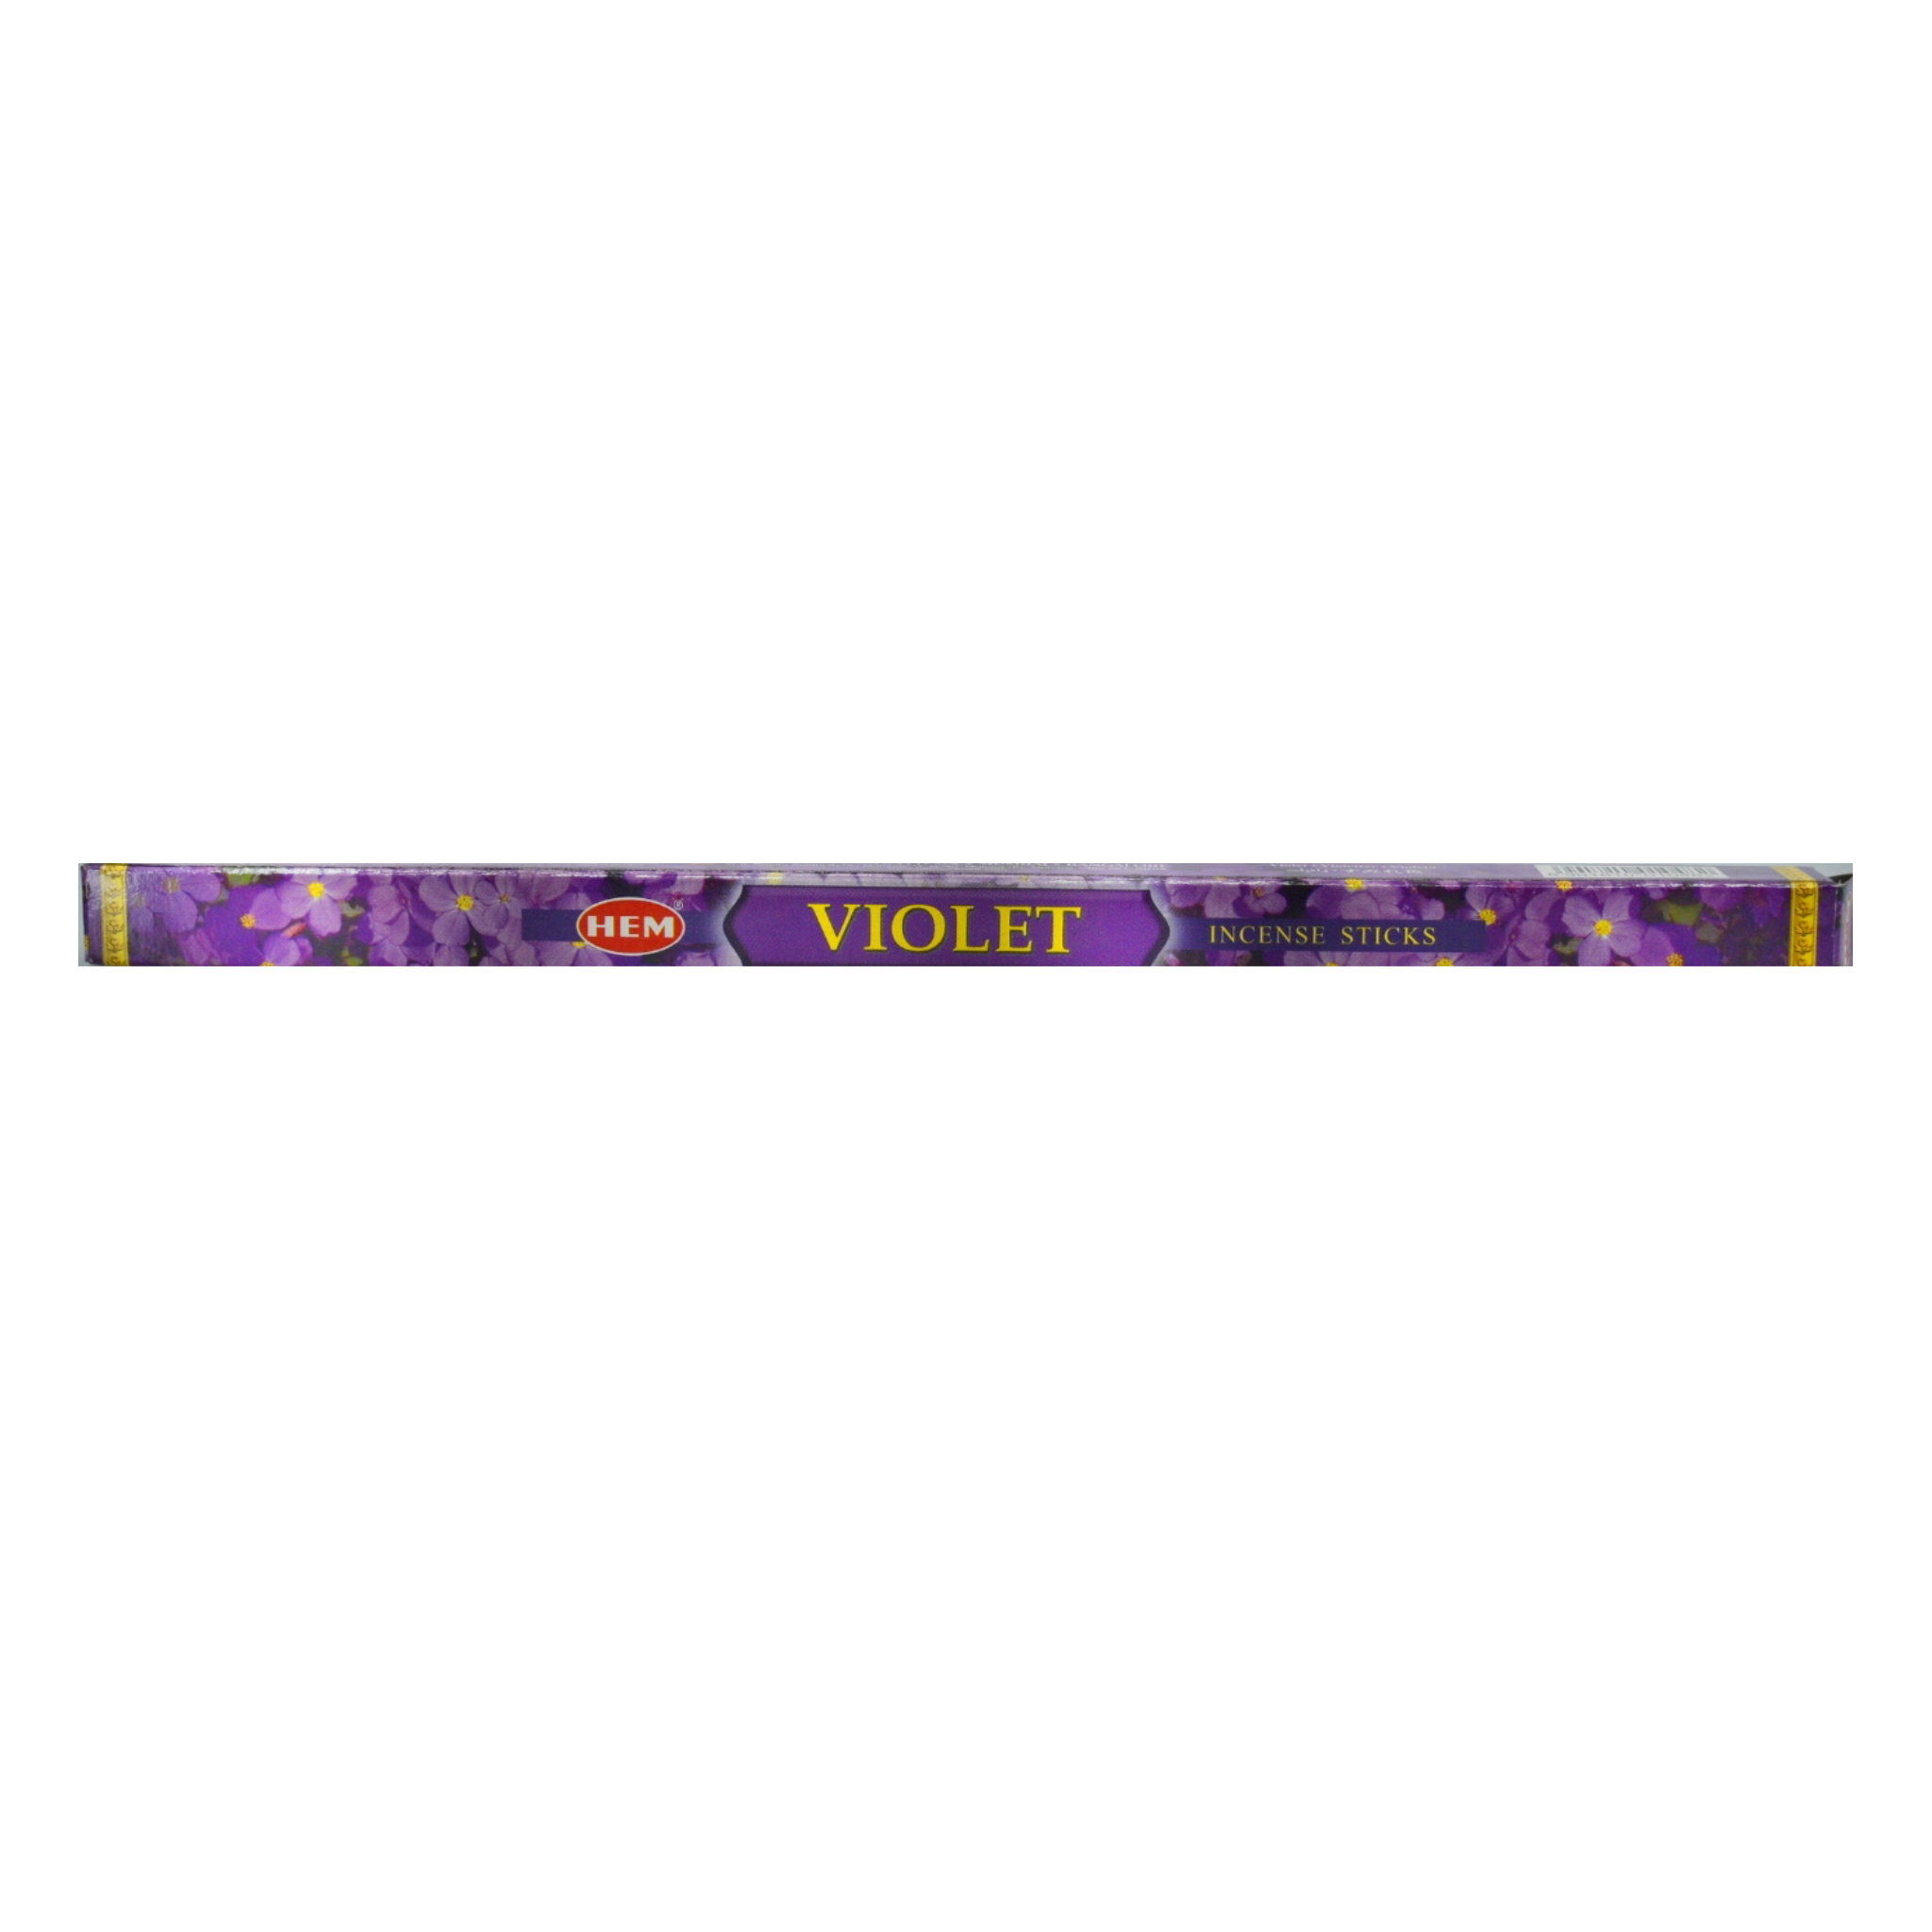 Violet Incense Sticks. Center of the box has the company name HEM in red. The title Violet Incense Sticks is in yellow with a violet background. The rest of the box has pictures of the violet flowers.